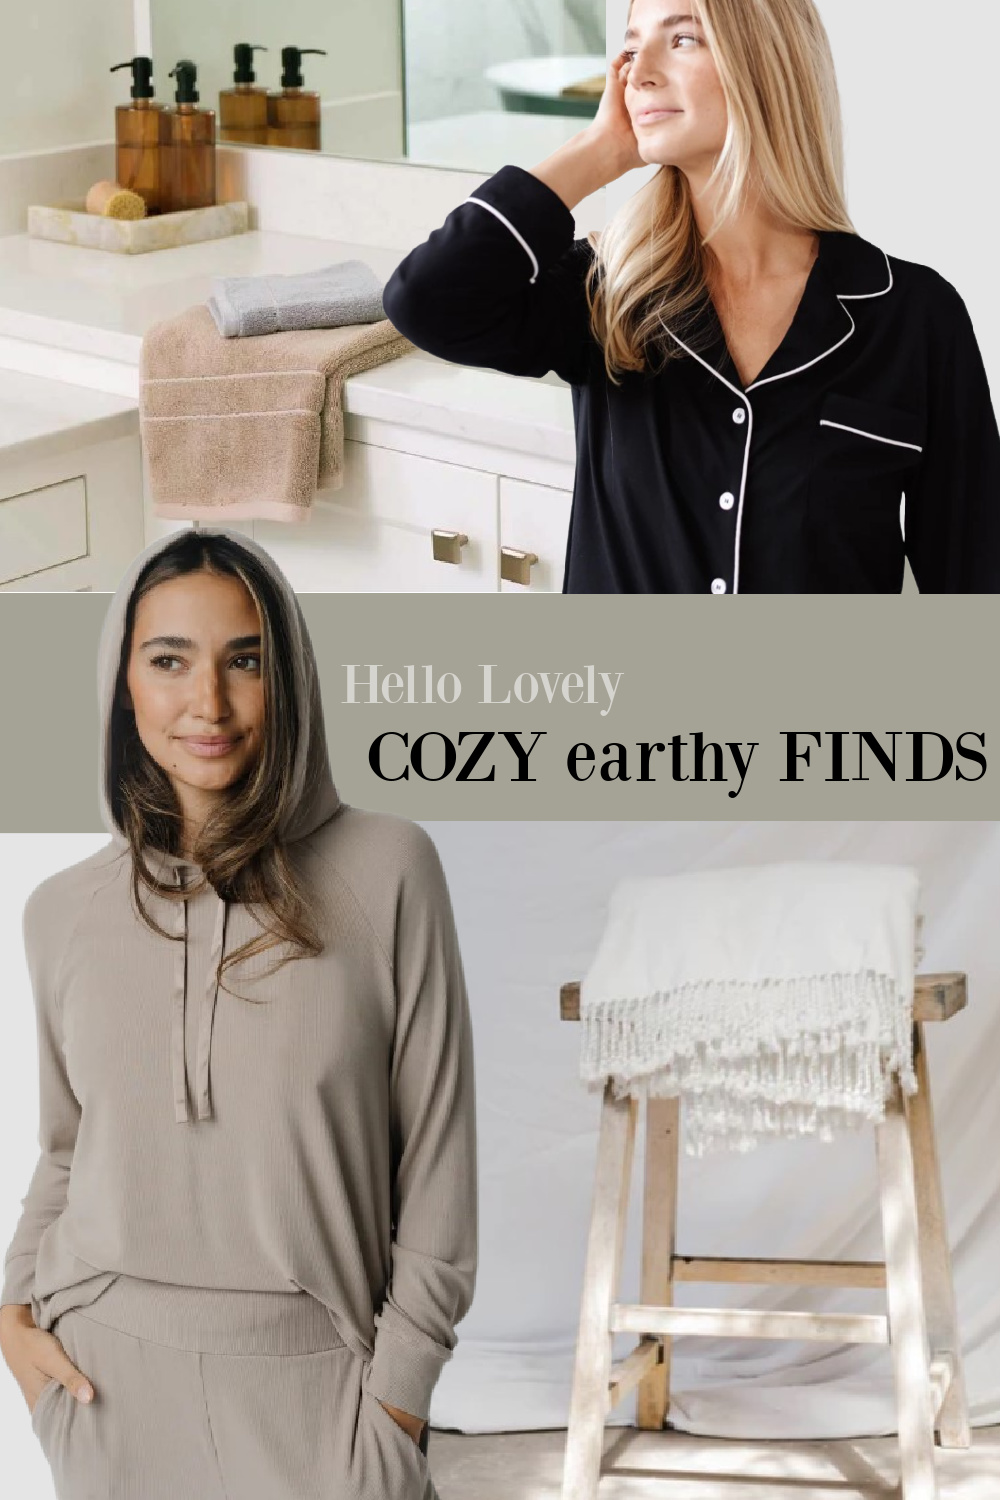 Cozy earthy finds for home and living on Hello Lovely Studio. #cozyorganicstyle